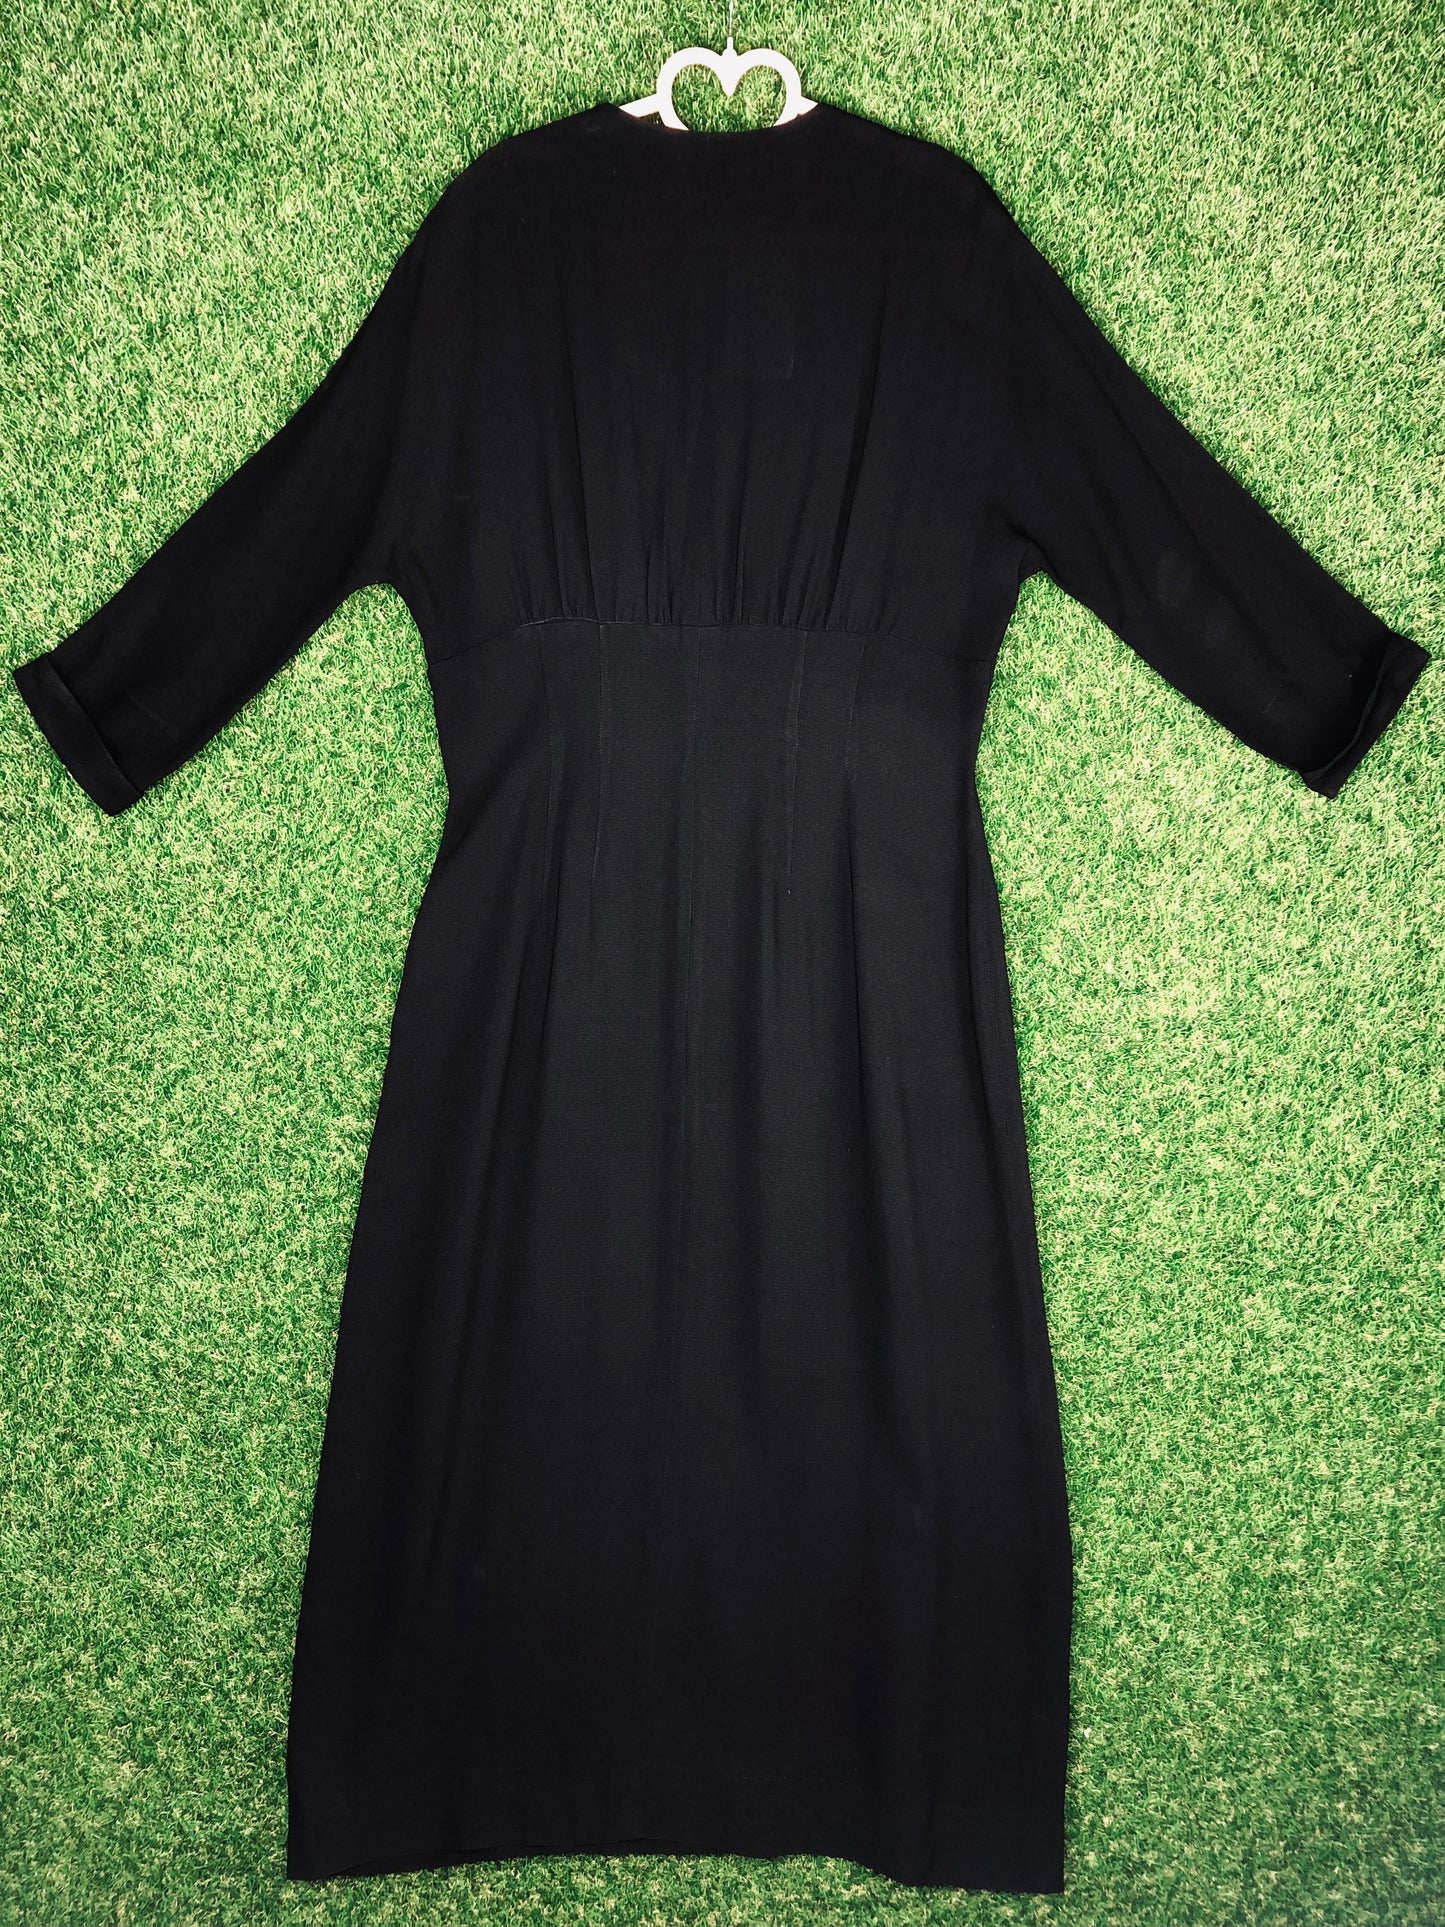 1950's 'Marilyn Monroe' Classic Little Black Dress With Bow Accents